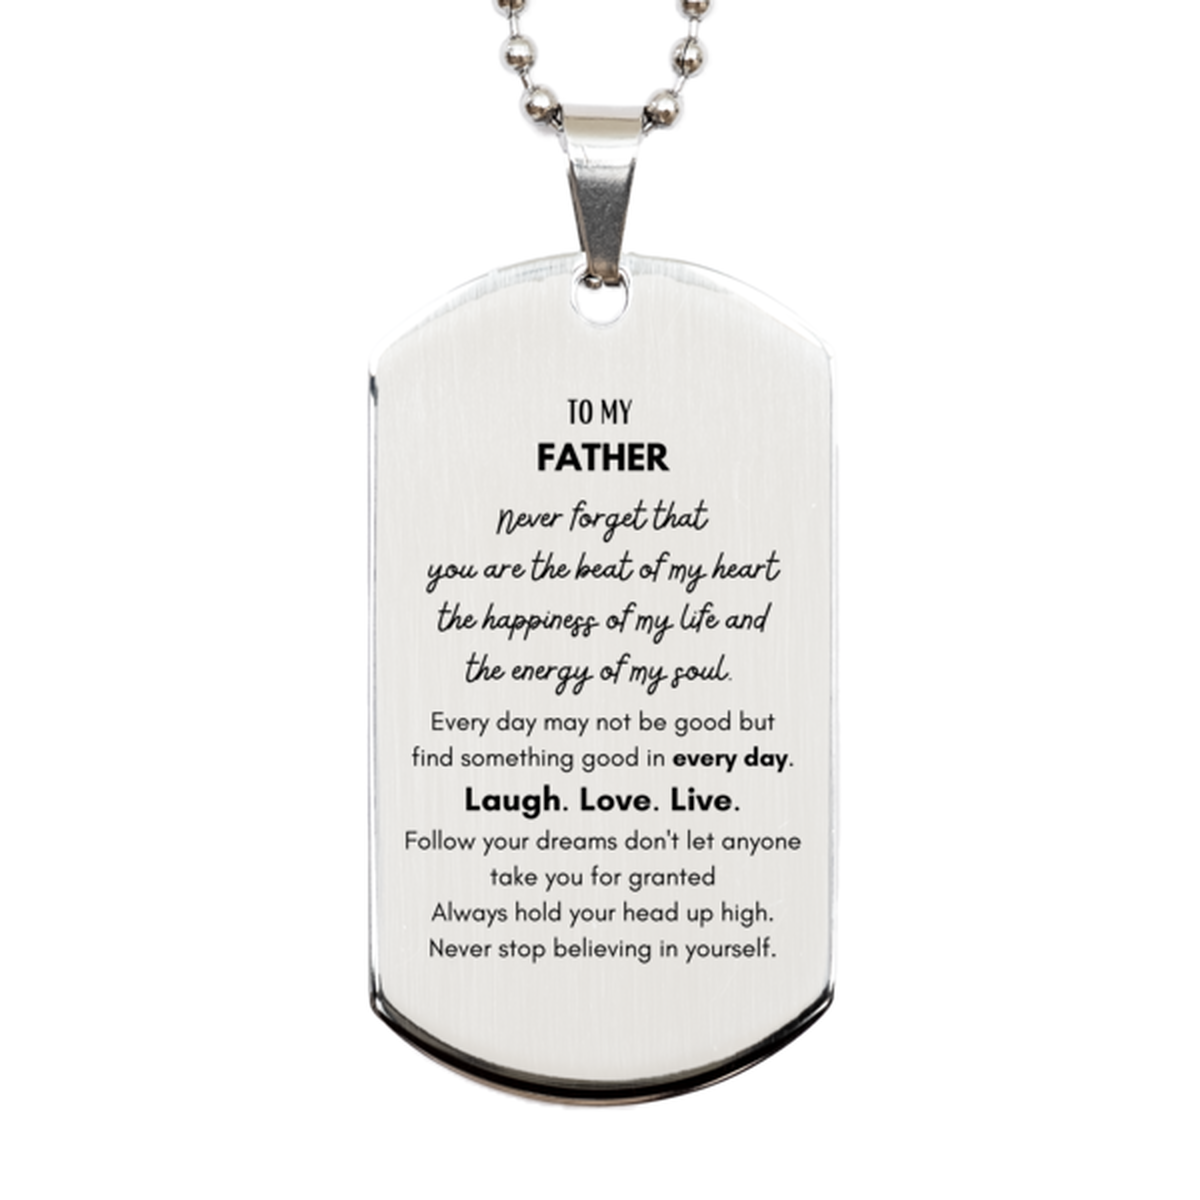 To My Father Dogtag Gifts, Christmas Father Silver Dog Tag Present, Birthday Unique Motivational For Father, To My Father Never forget that you are the beat of my heart the happiness of my life and the energy of my soul